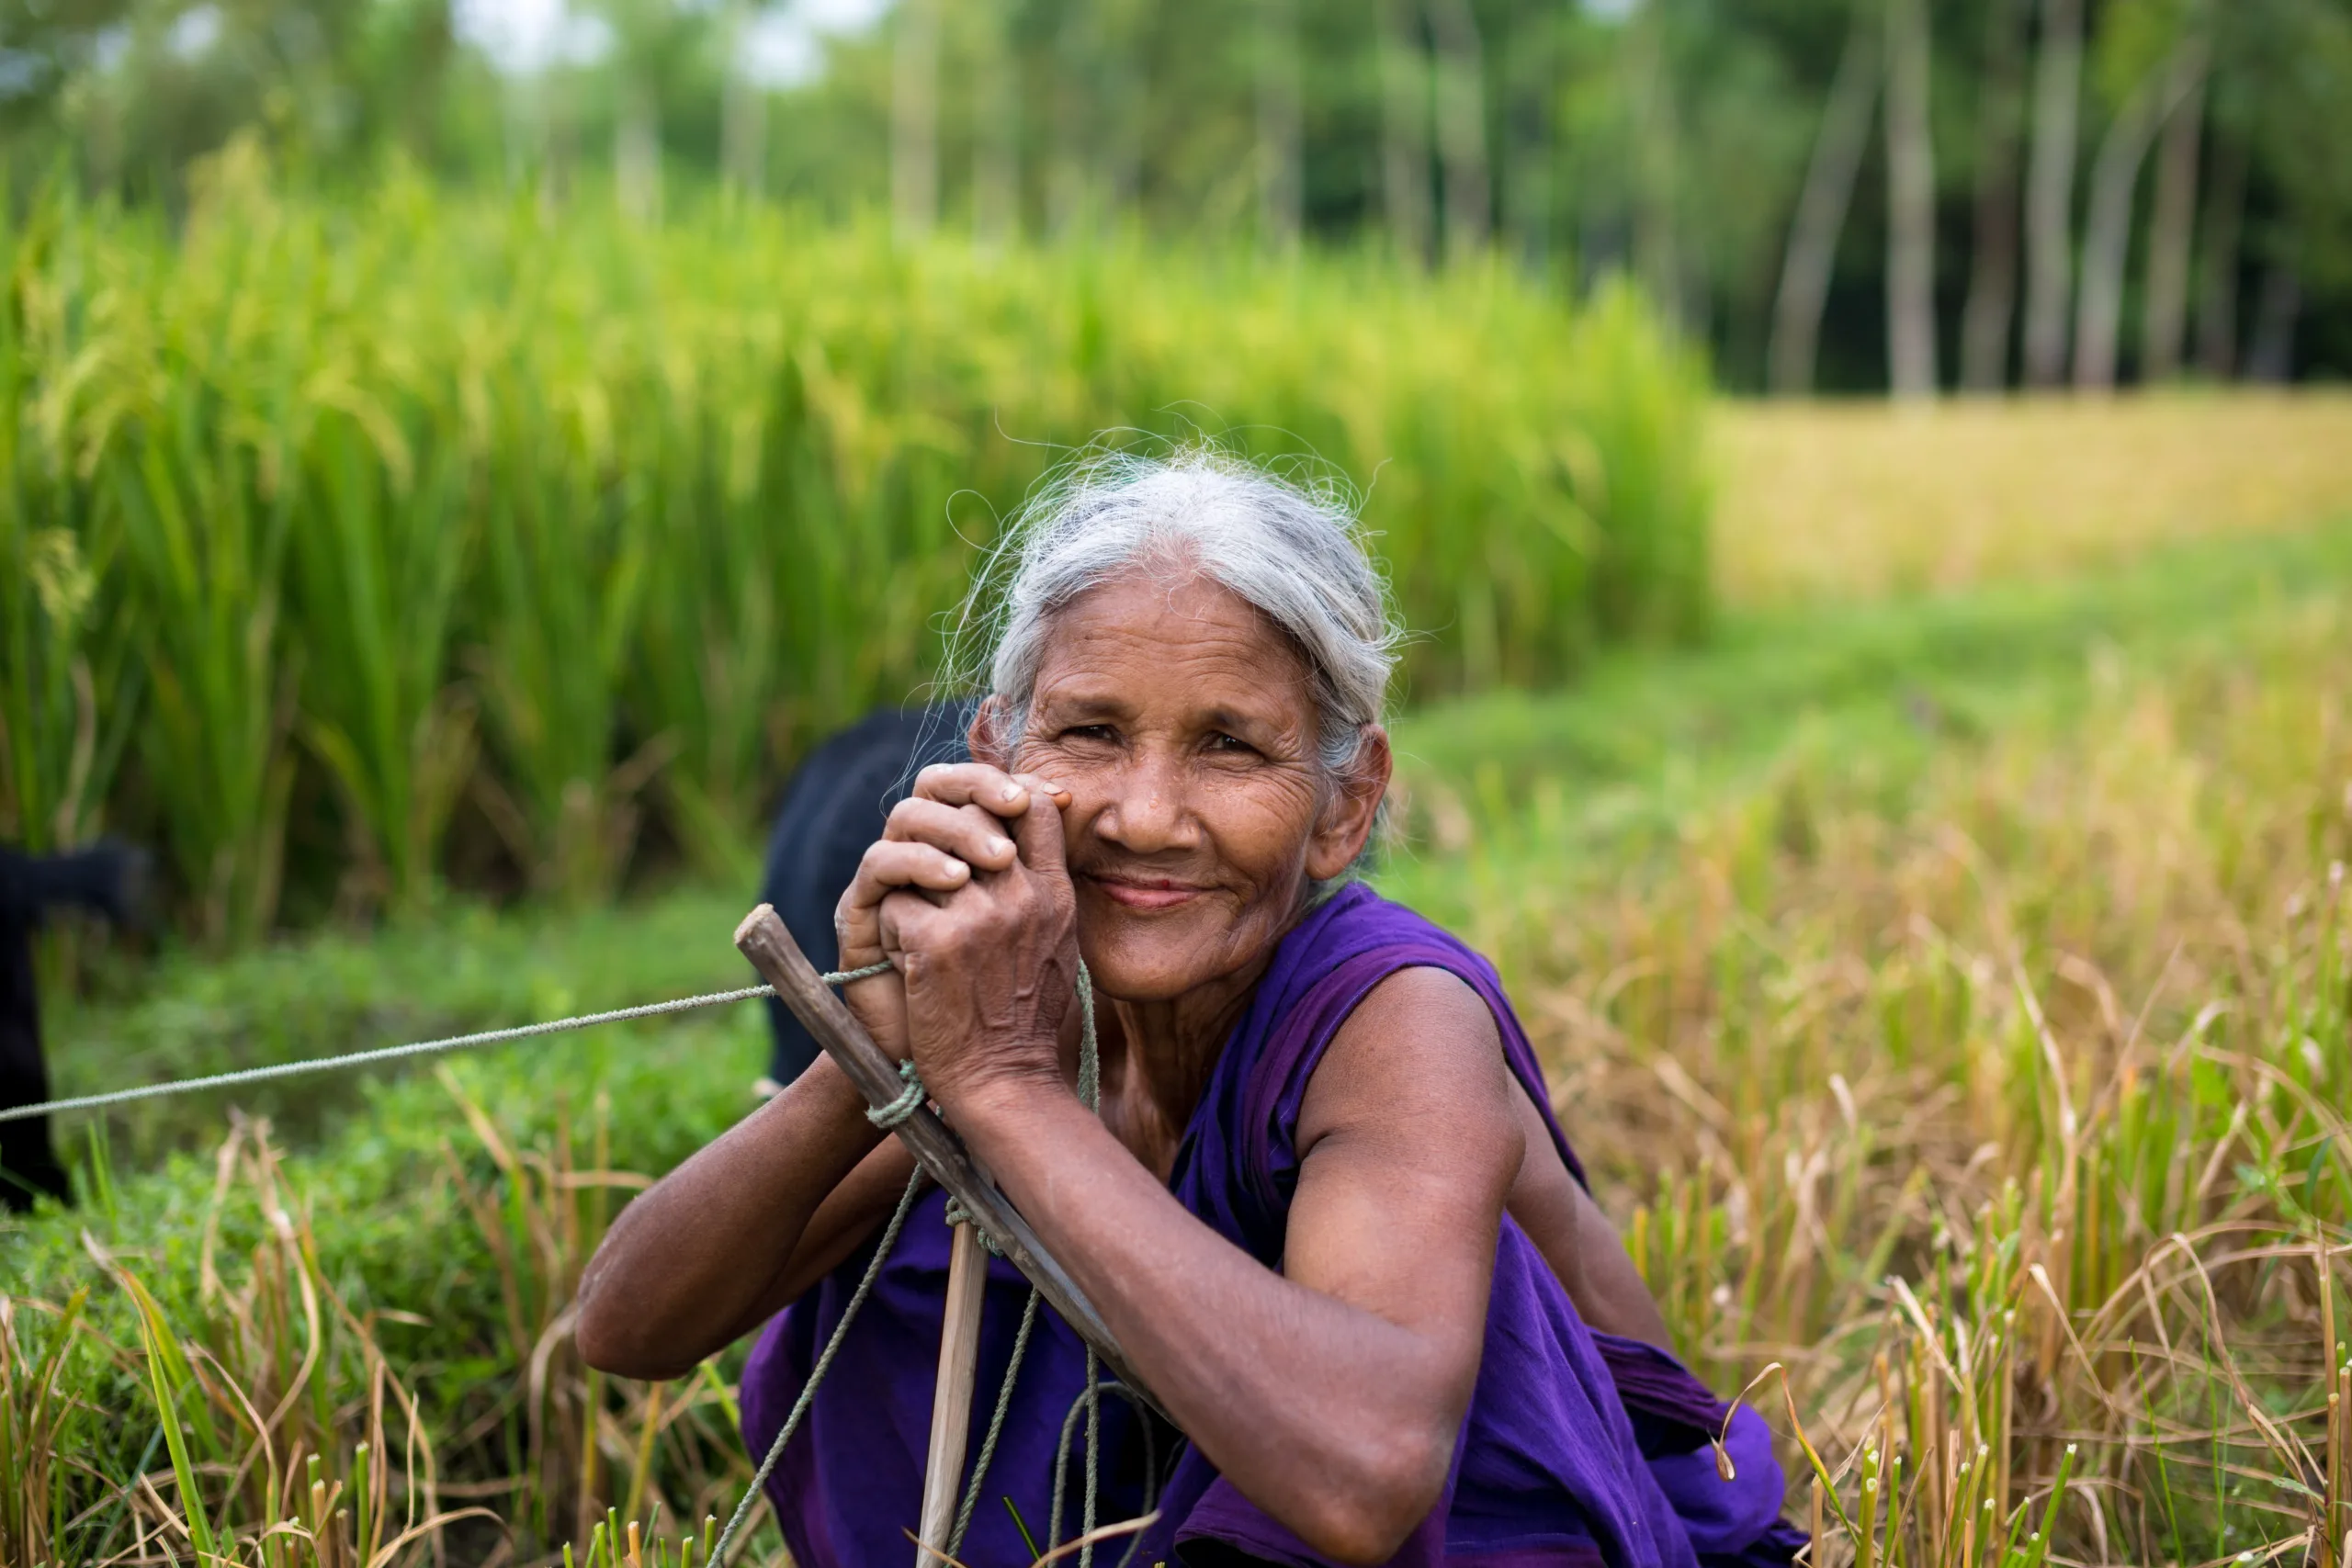 Smiling Woman at the Field